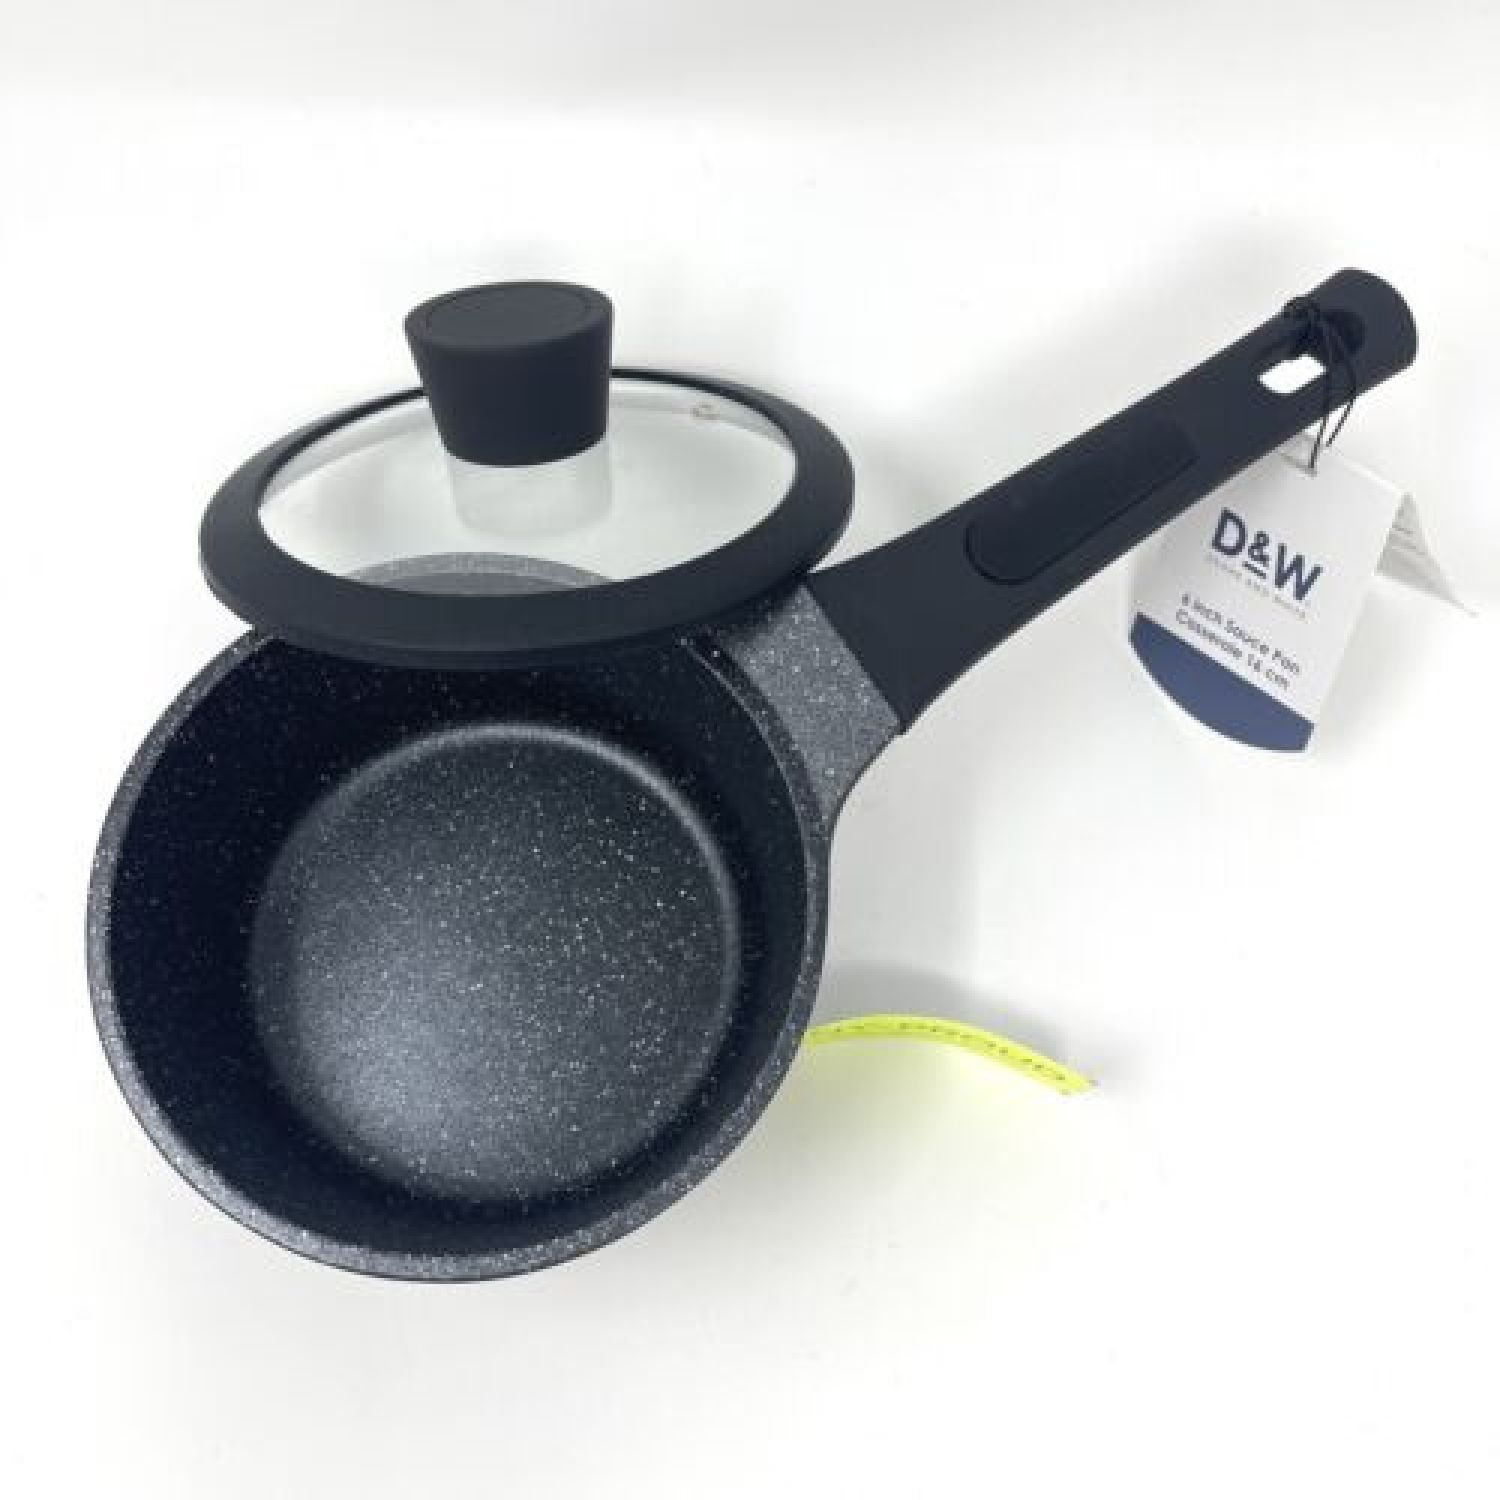 D&W Saucepan NonStick With Lid 7 inch Small Stock Pot PFOA Free Dishwasher  Safe